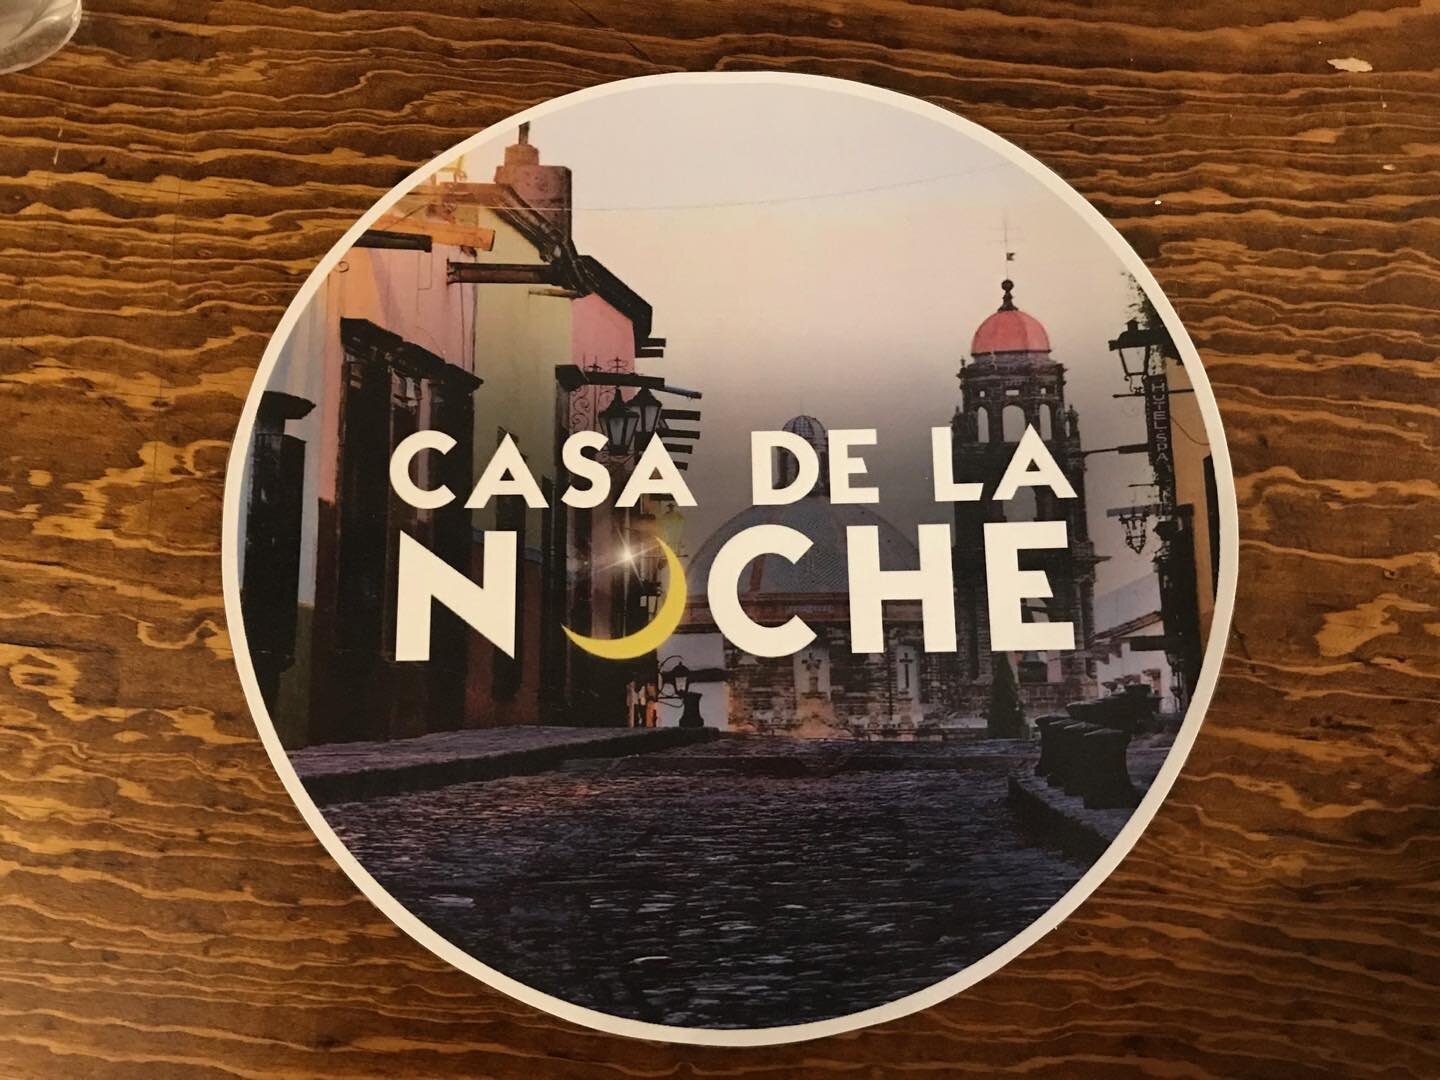 Know us? Like us? Come see us! Come and stay with us! Follow us! 

#casadelanochesma #boutiquehotel #sanmigueldeallende #love #travel #art #artworkshops